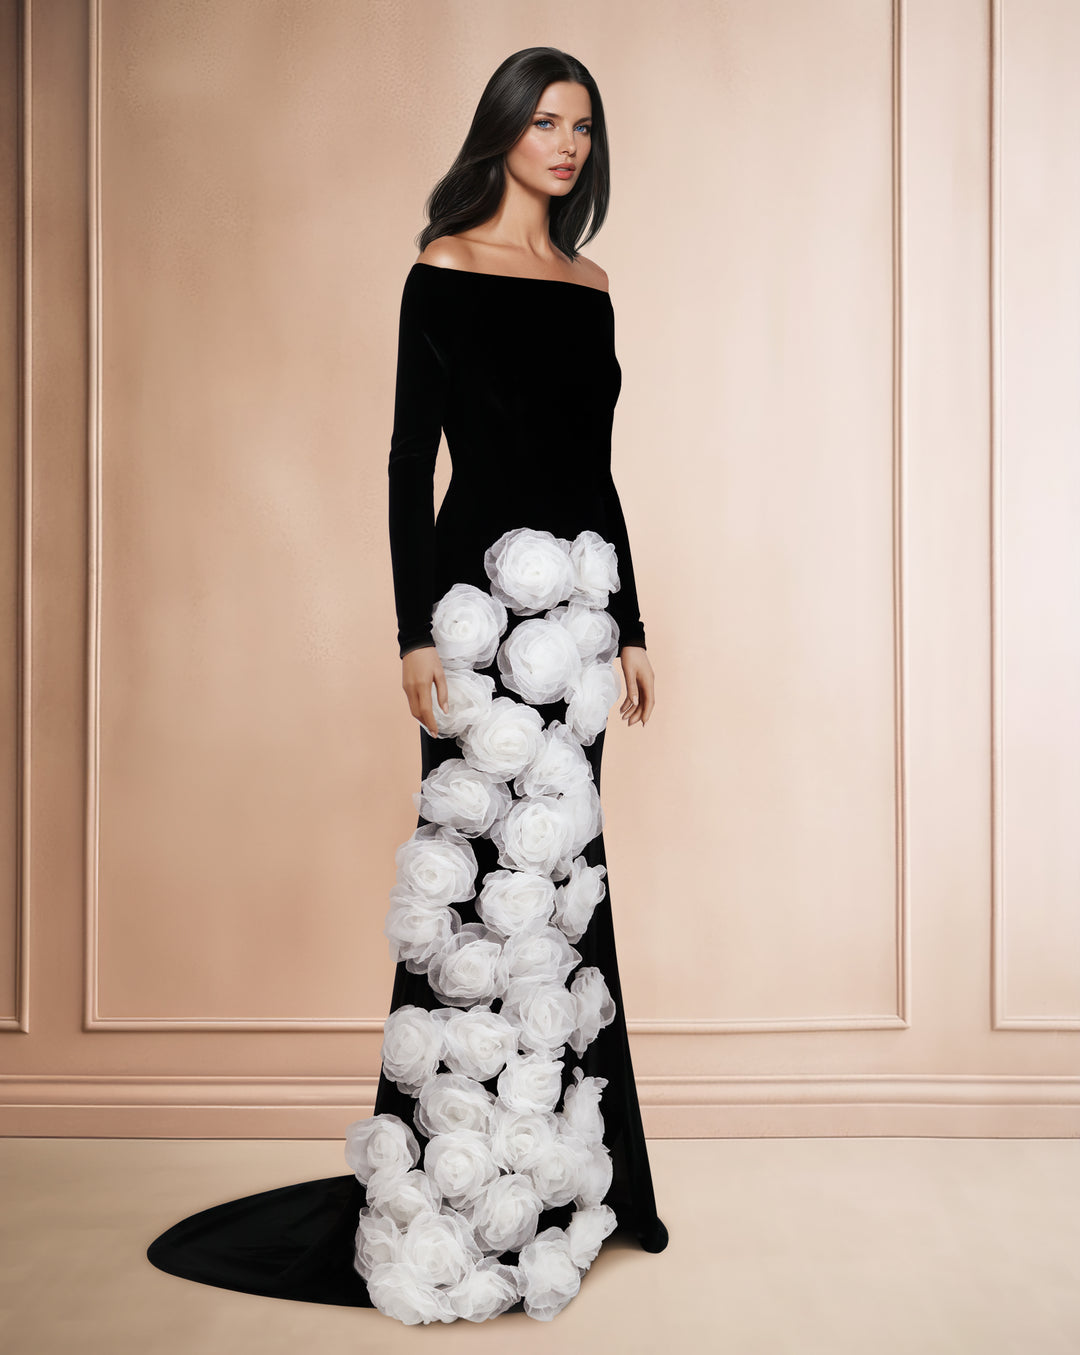 Shoulder-off column dress with 3D flowers and a train